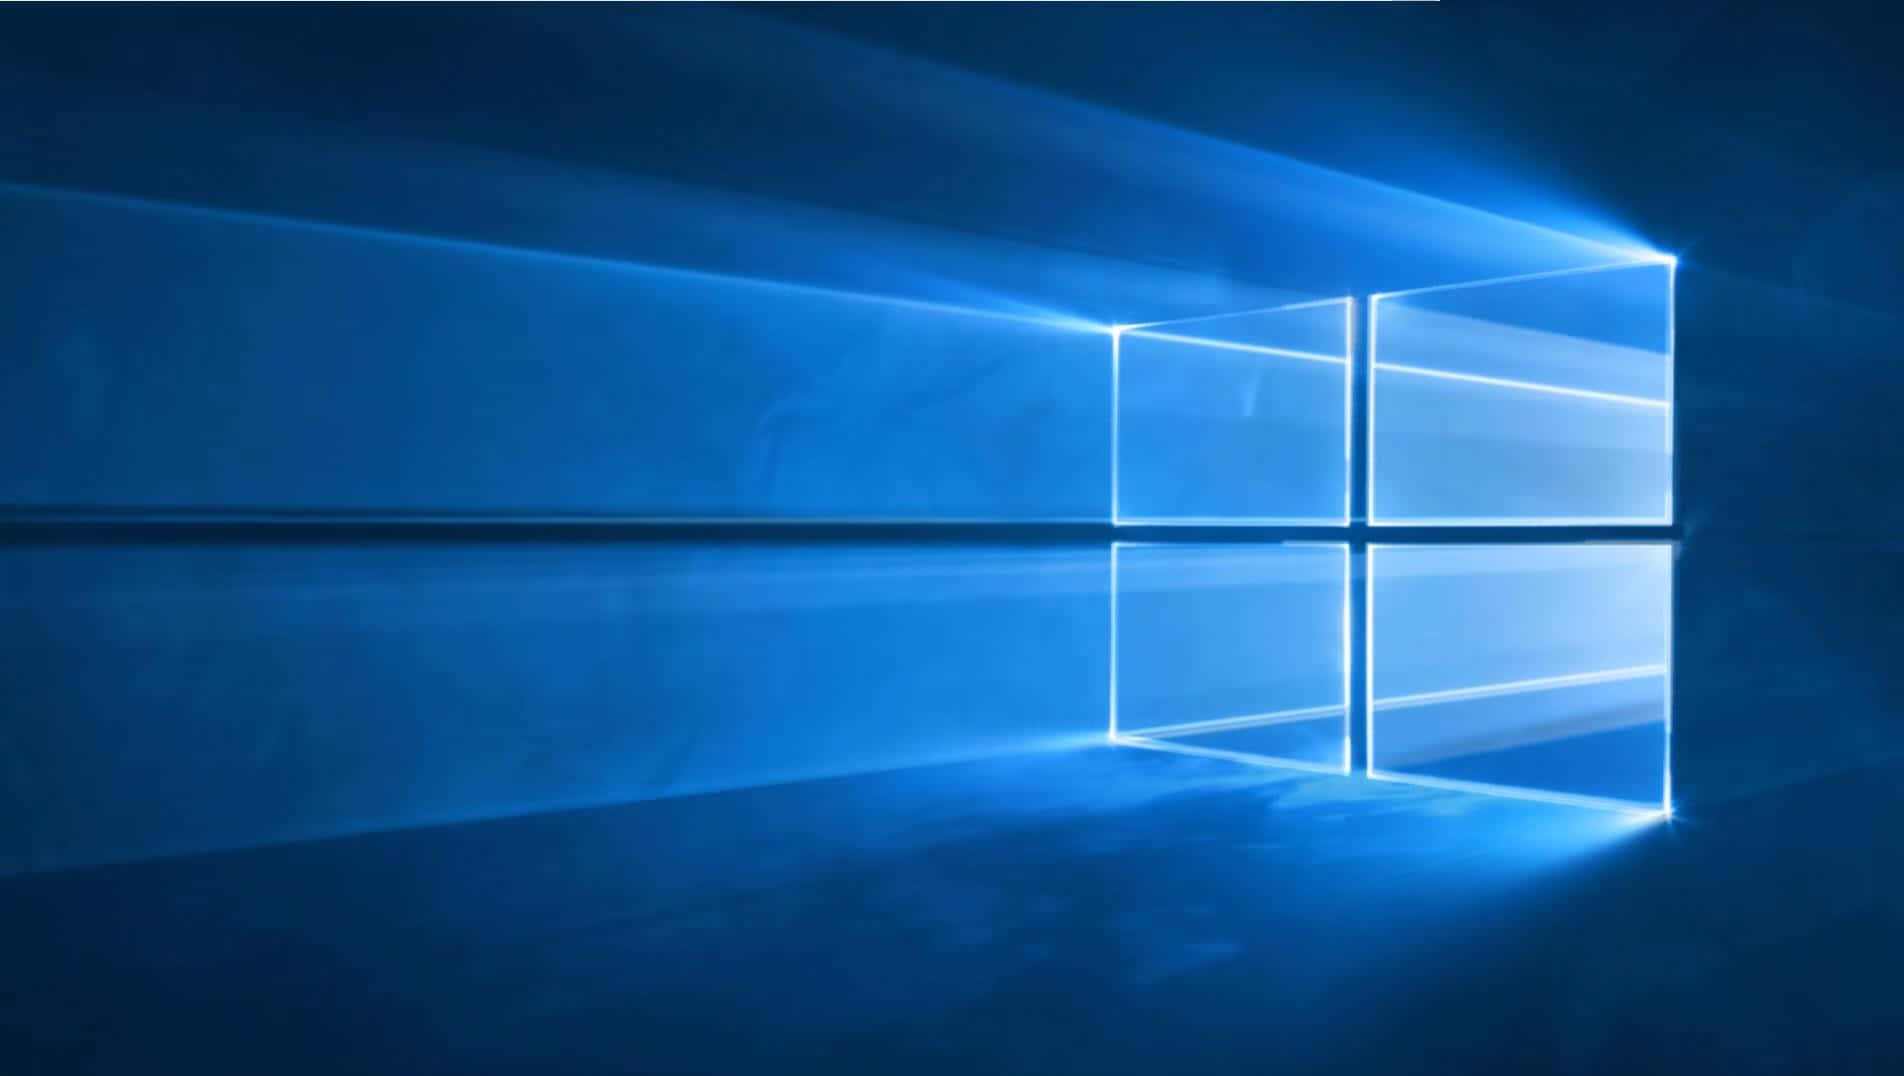 Windows 10 Logo With A Blue Background